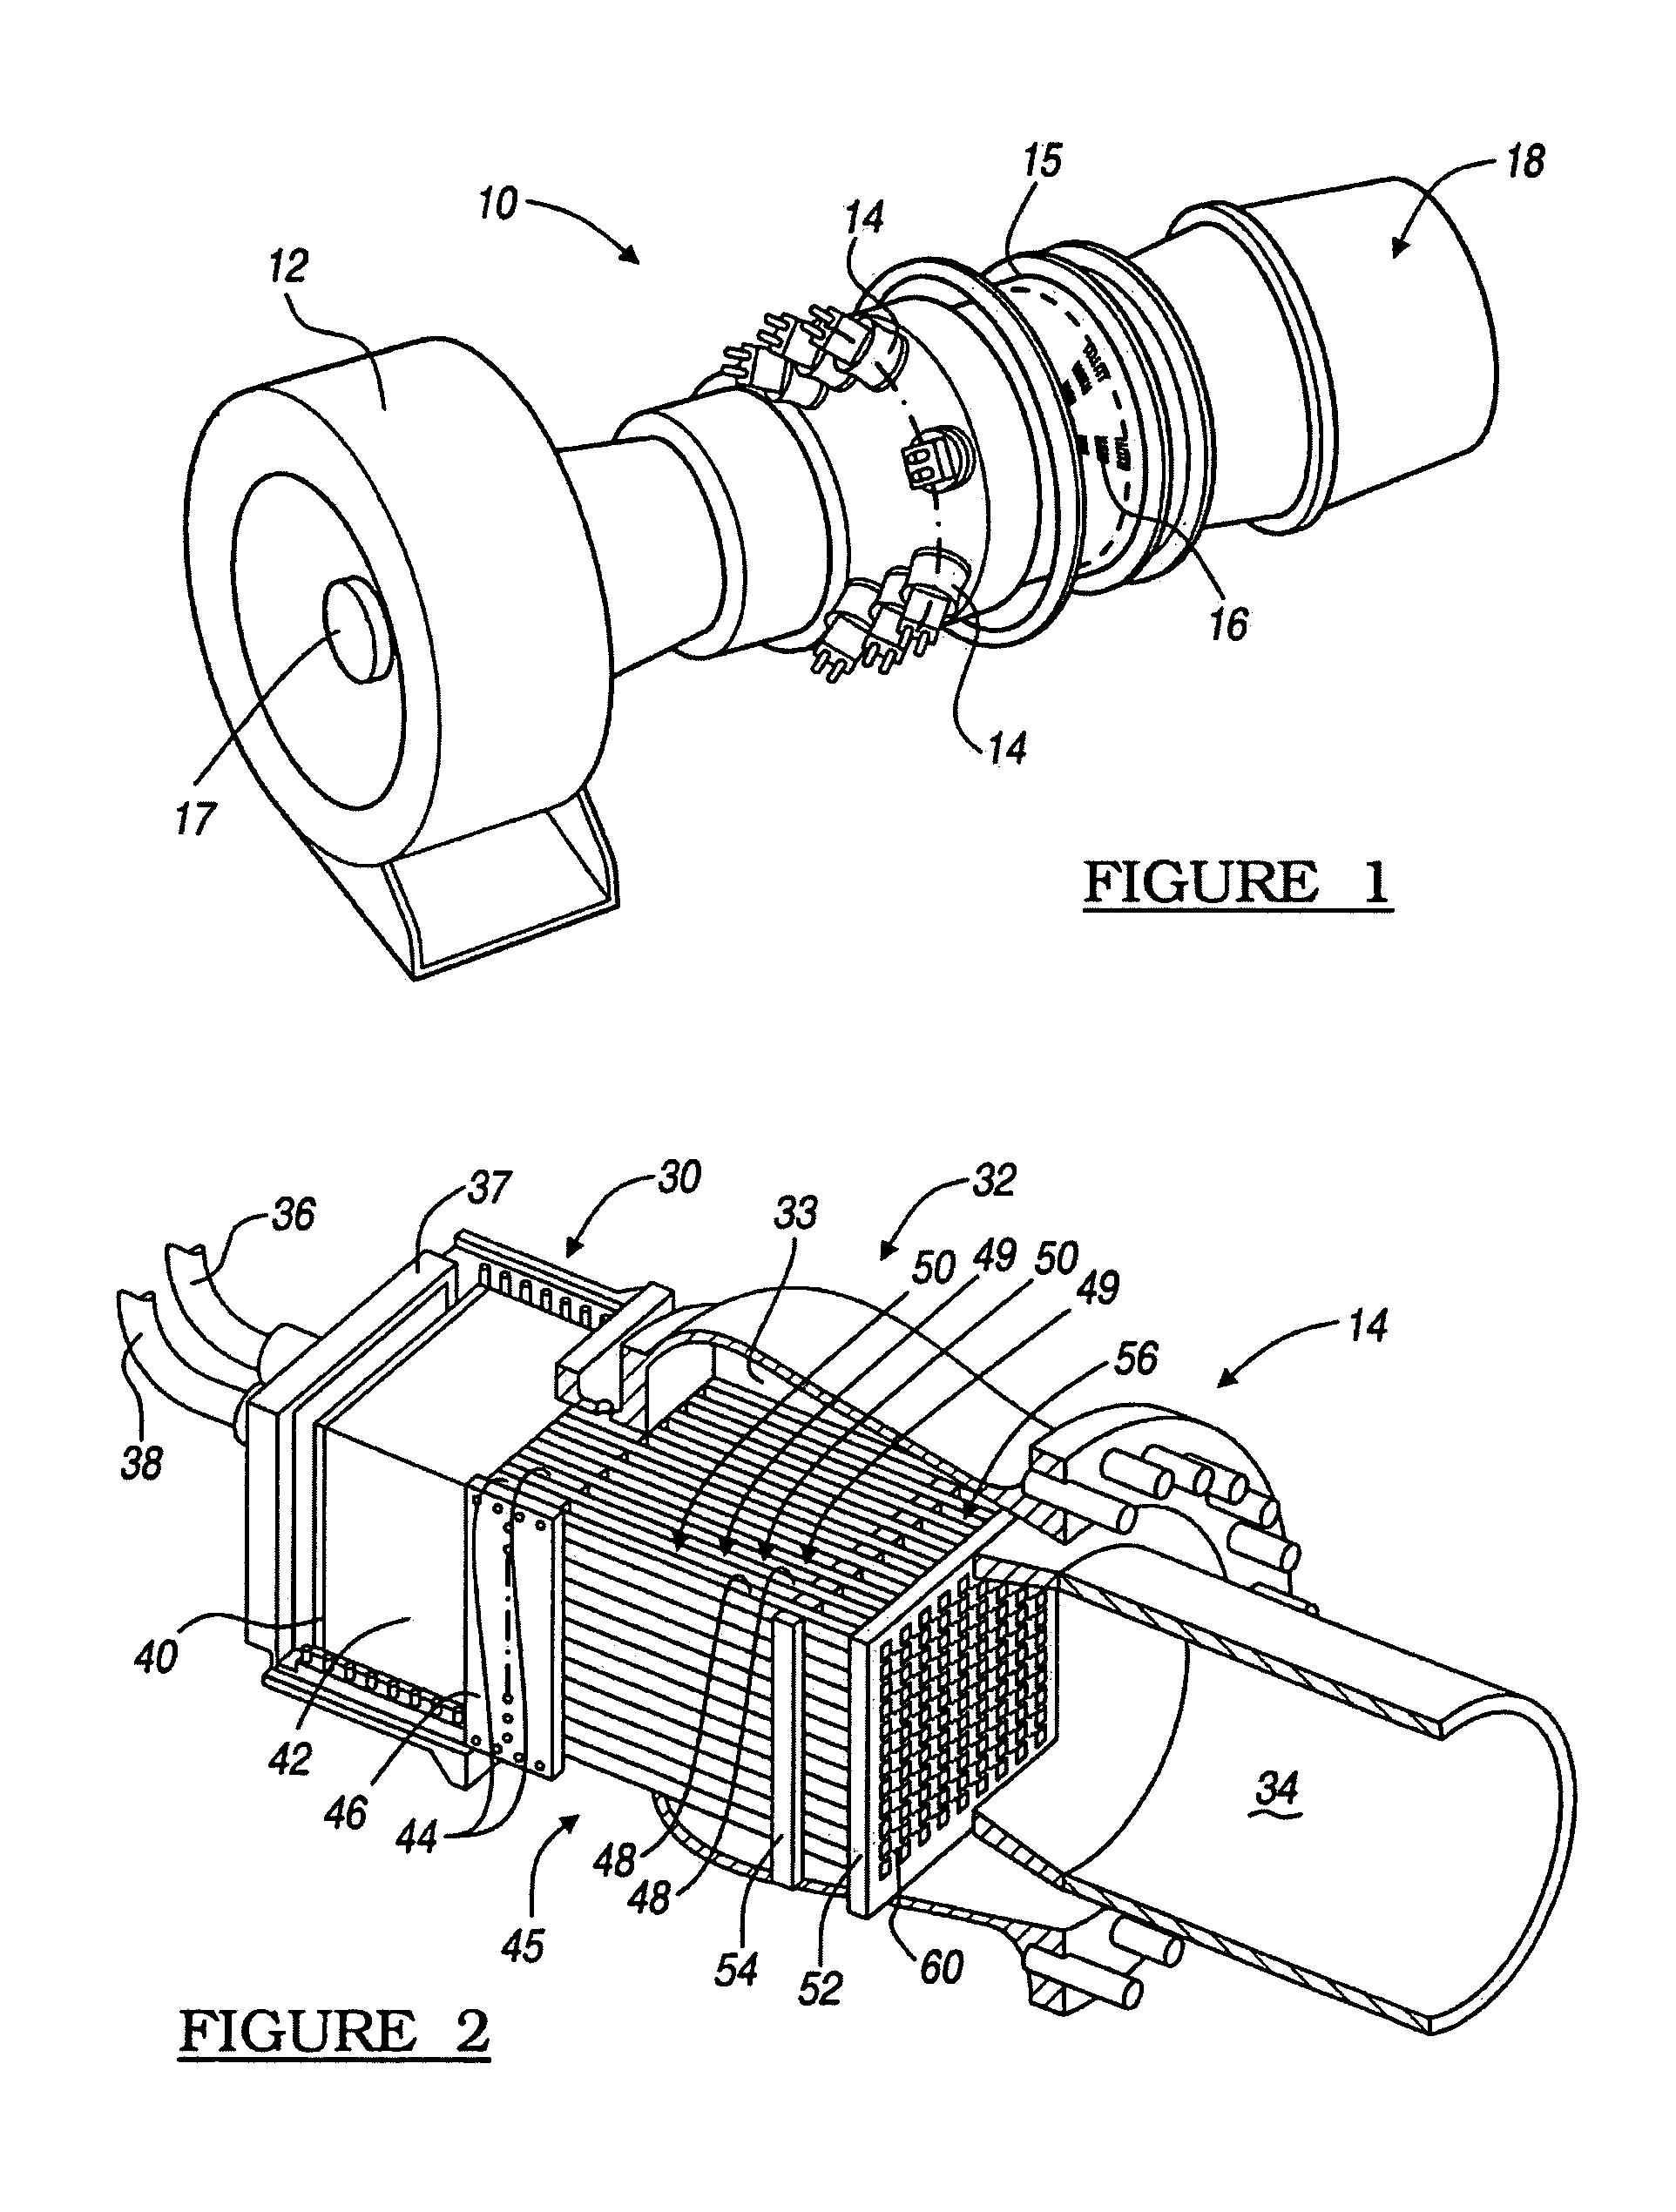 Method and apparatus for injecting a fuel into a combustor assembly